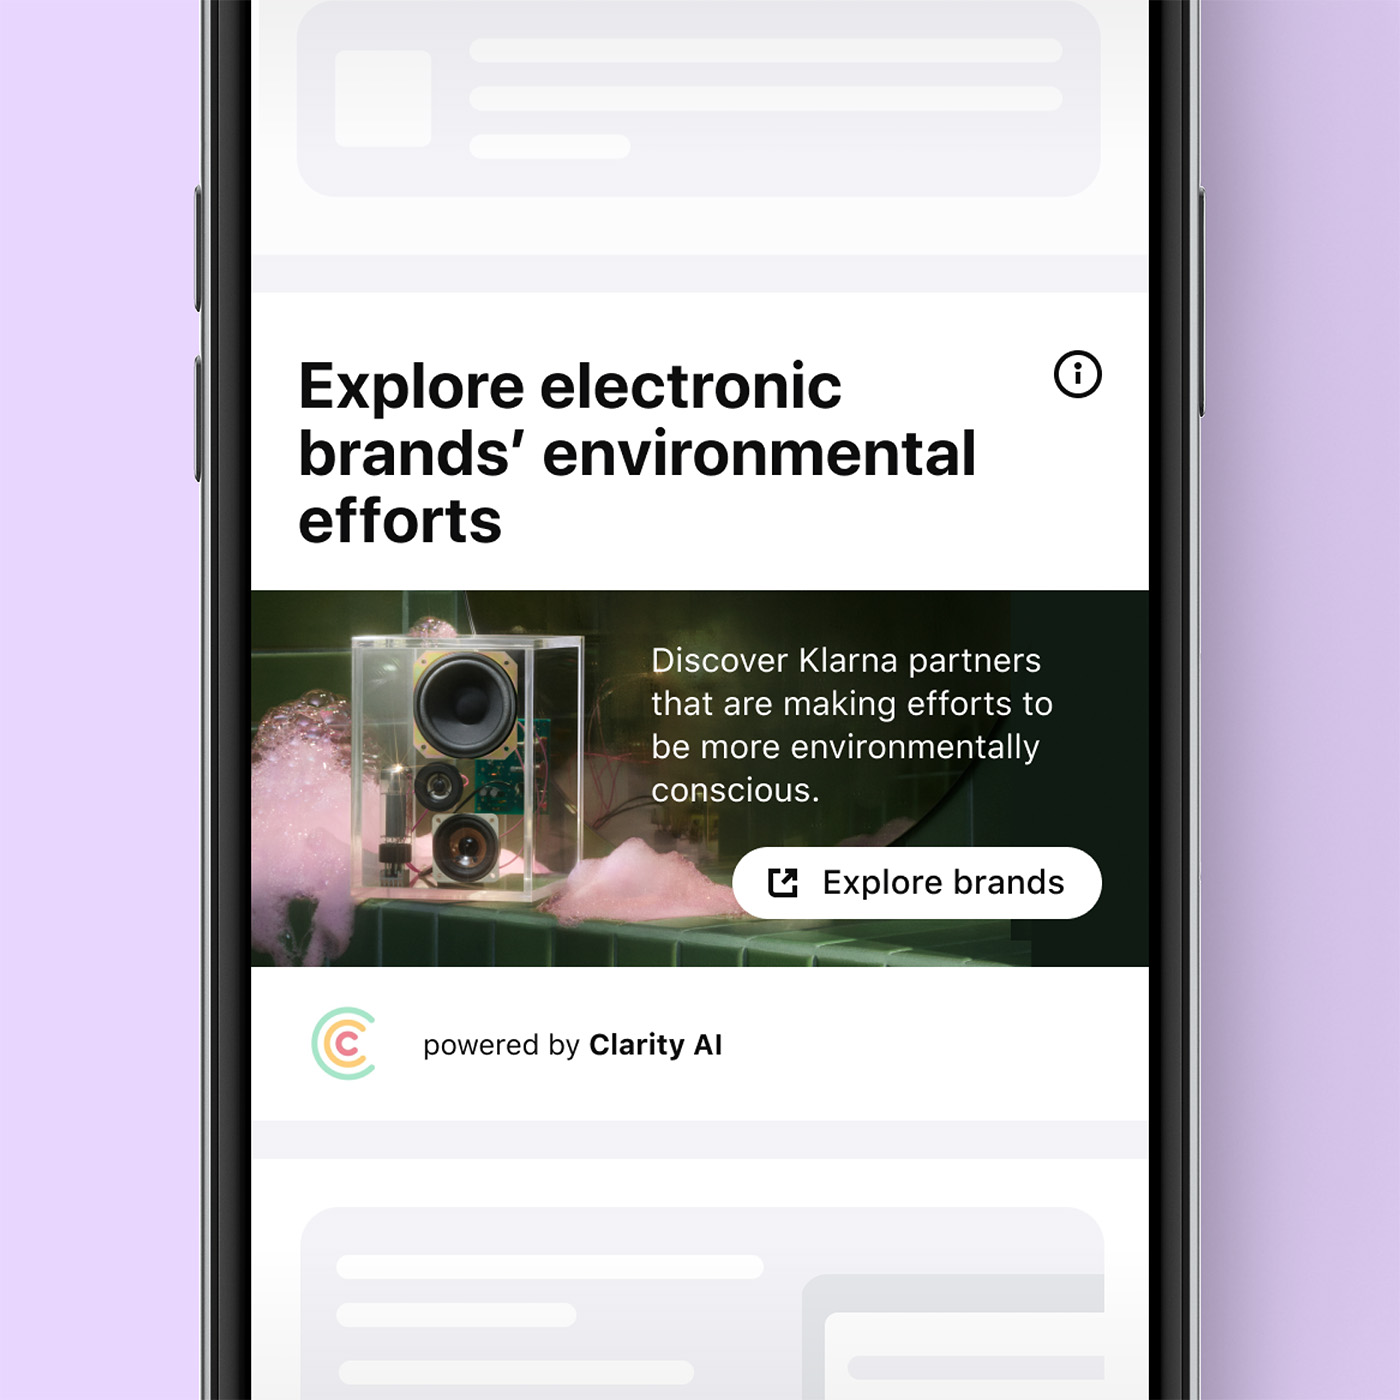 Explore our list of electronic brands’ environmental efforts.